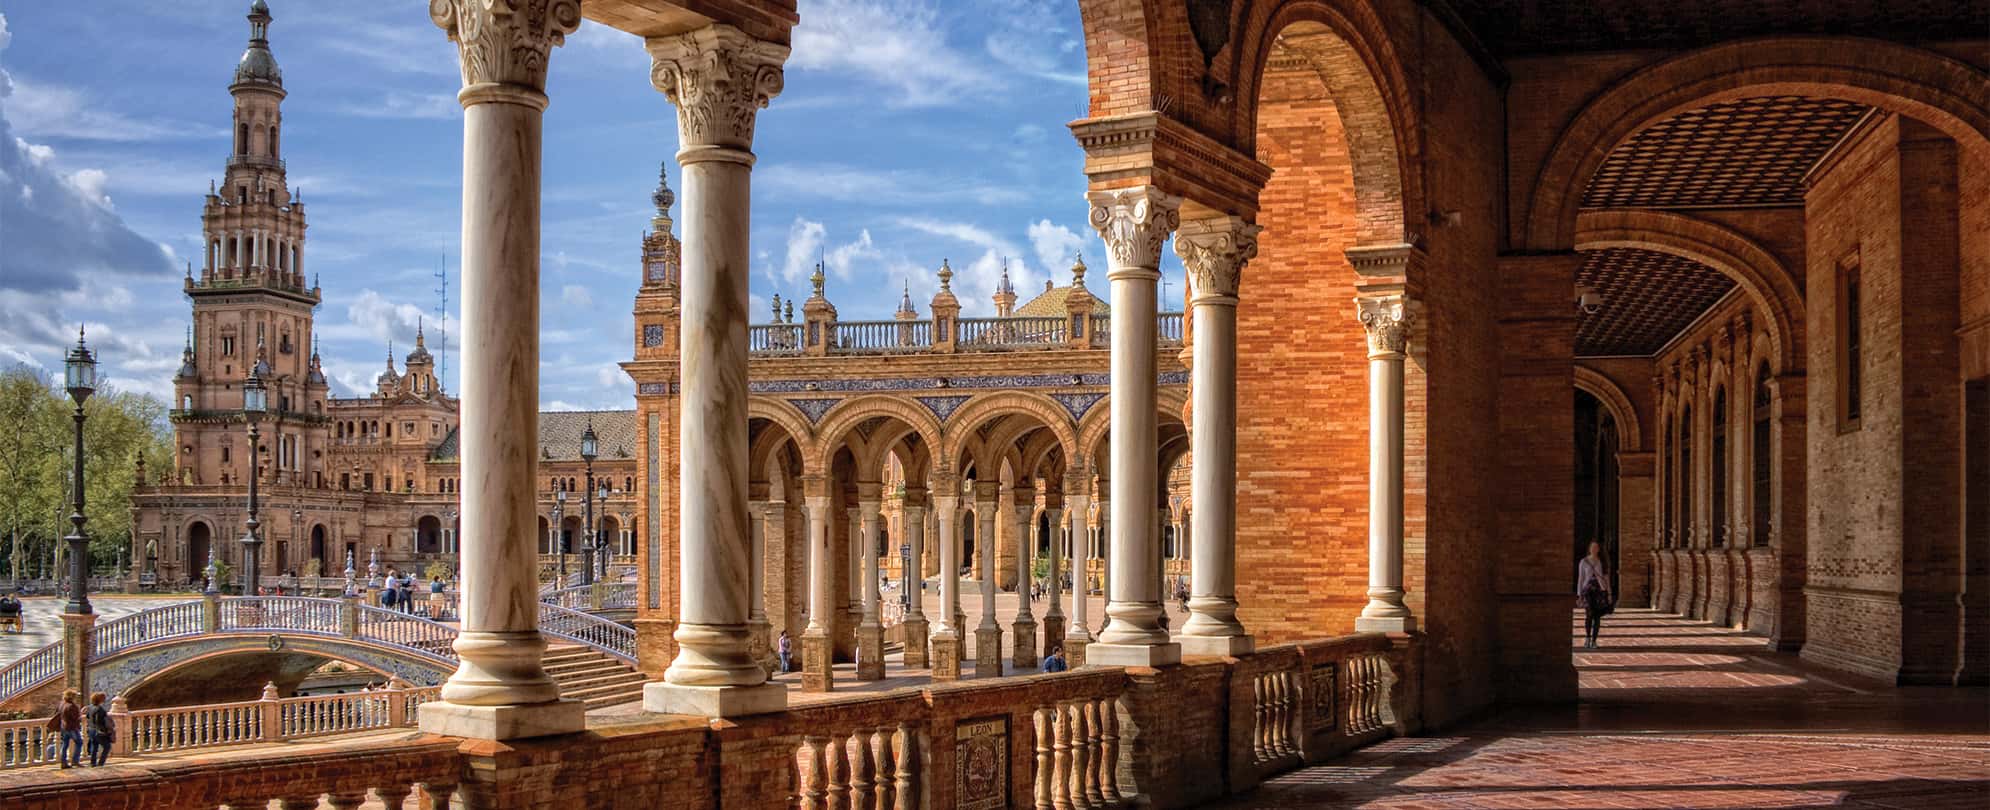 Marble columns, tall tower, and red stone architecture at the Plaza De Espana in Madrid, Spain.